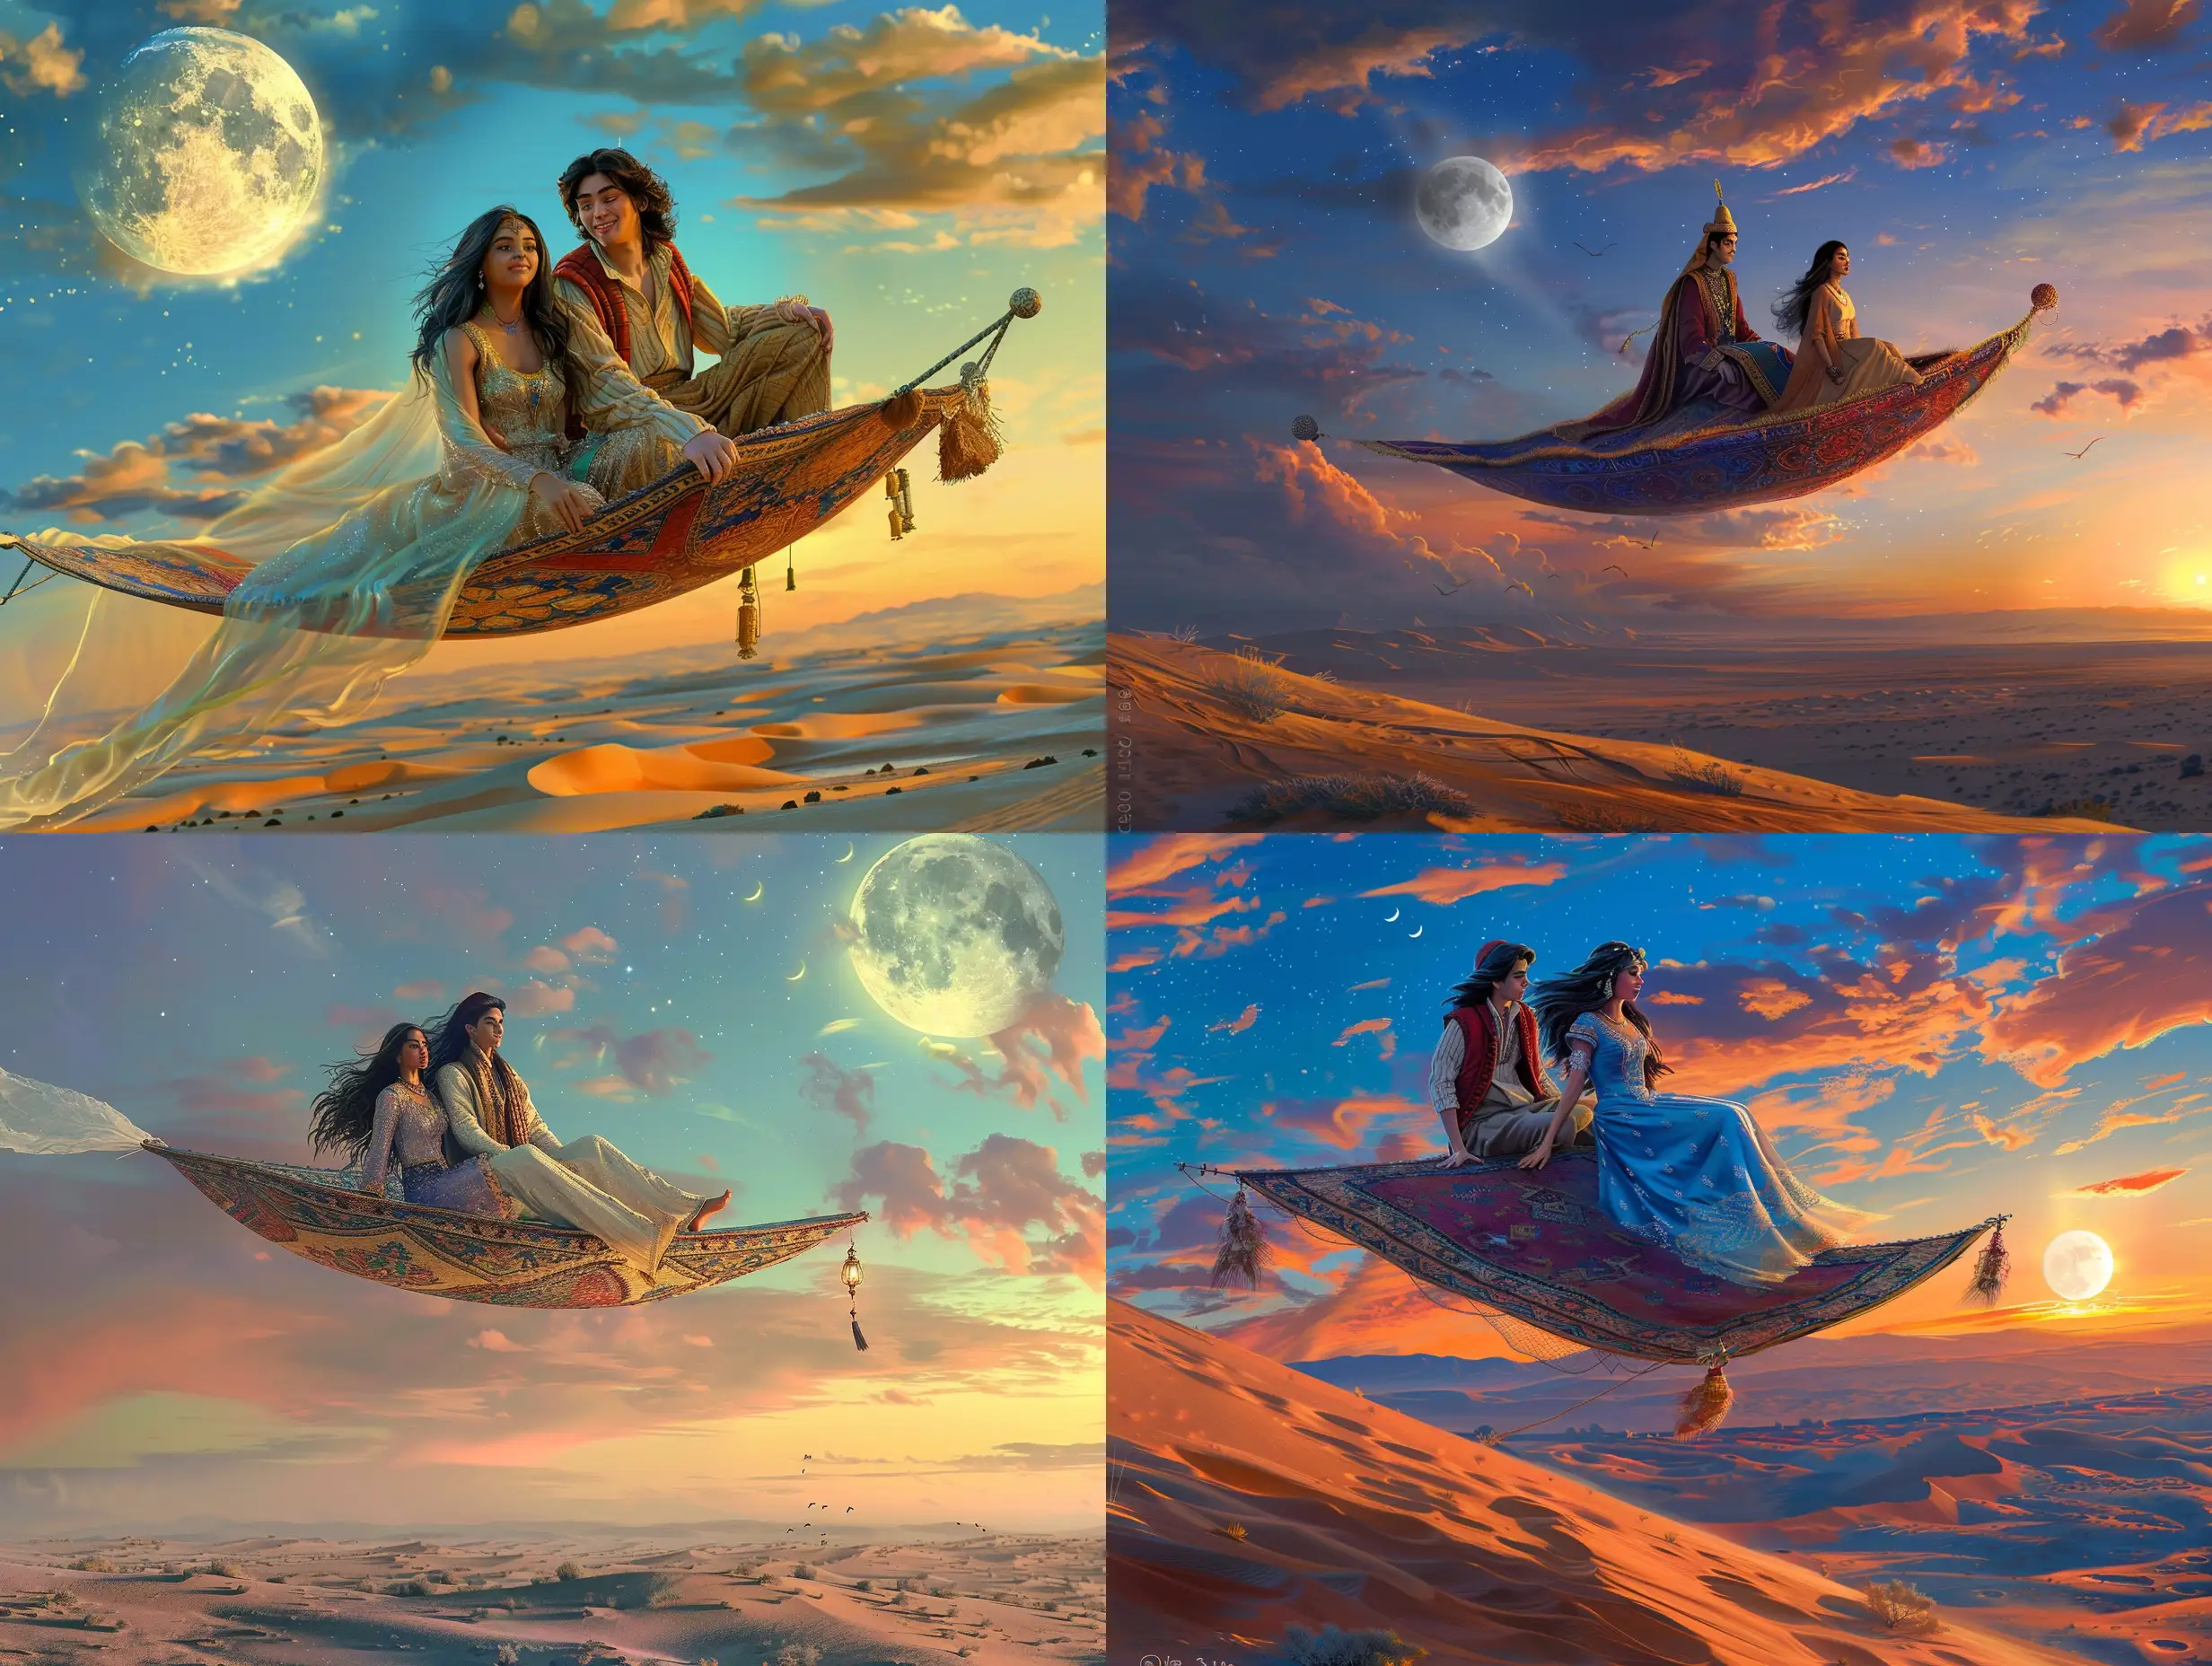 Young-Lovers-on-a-Flying-Carpet-in-a-Magical-Eastern-Twilight